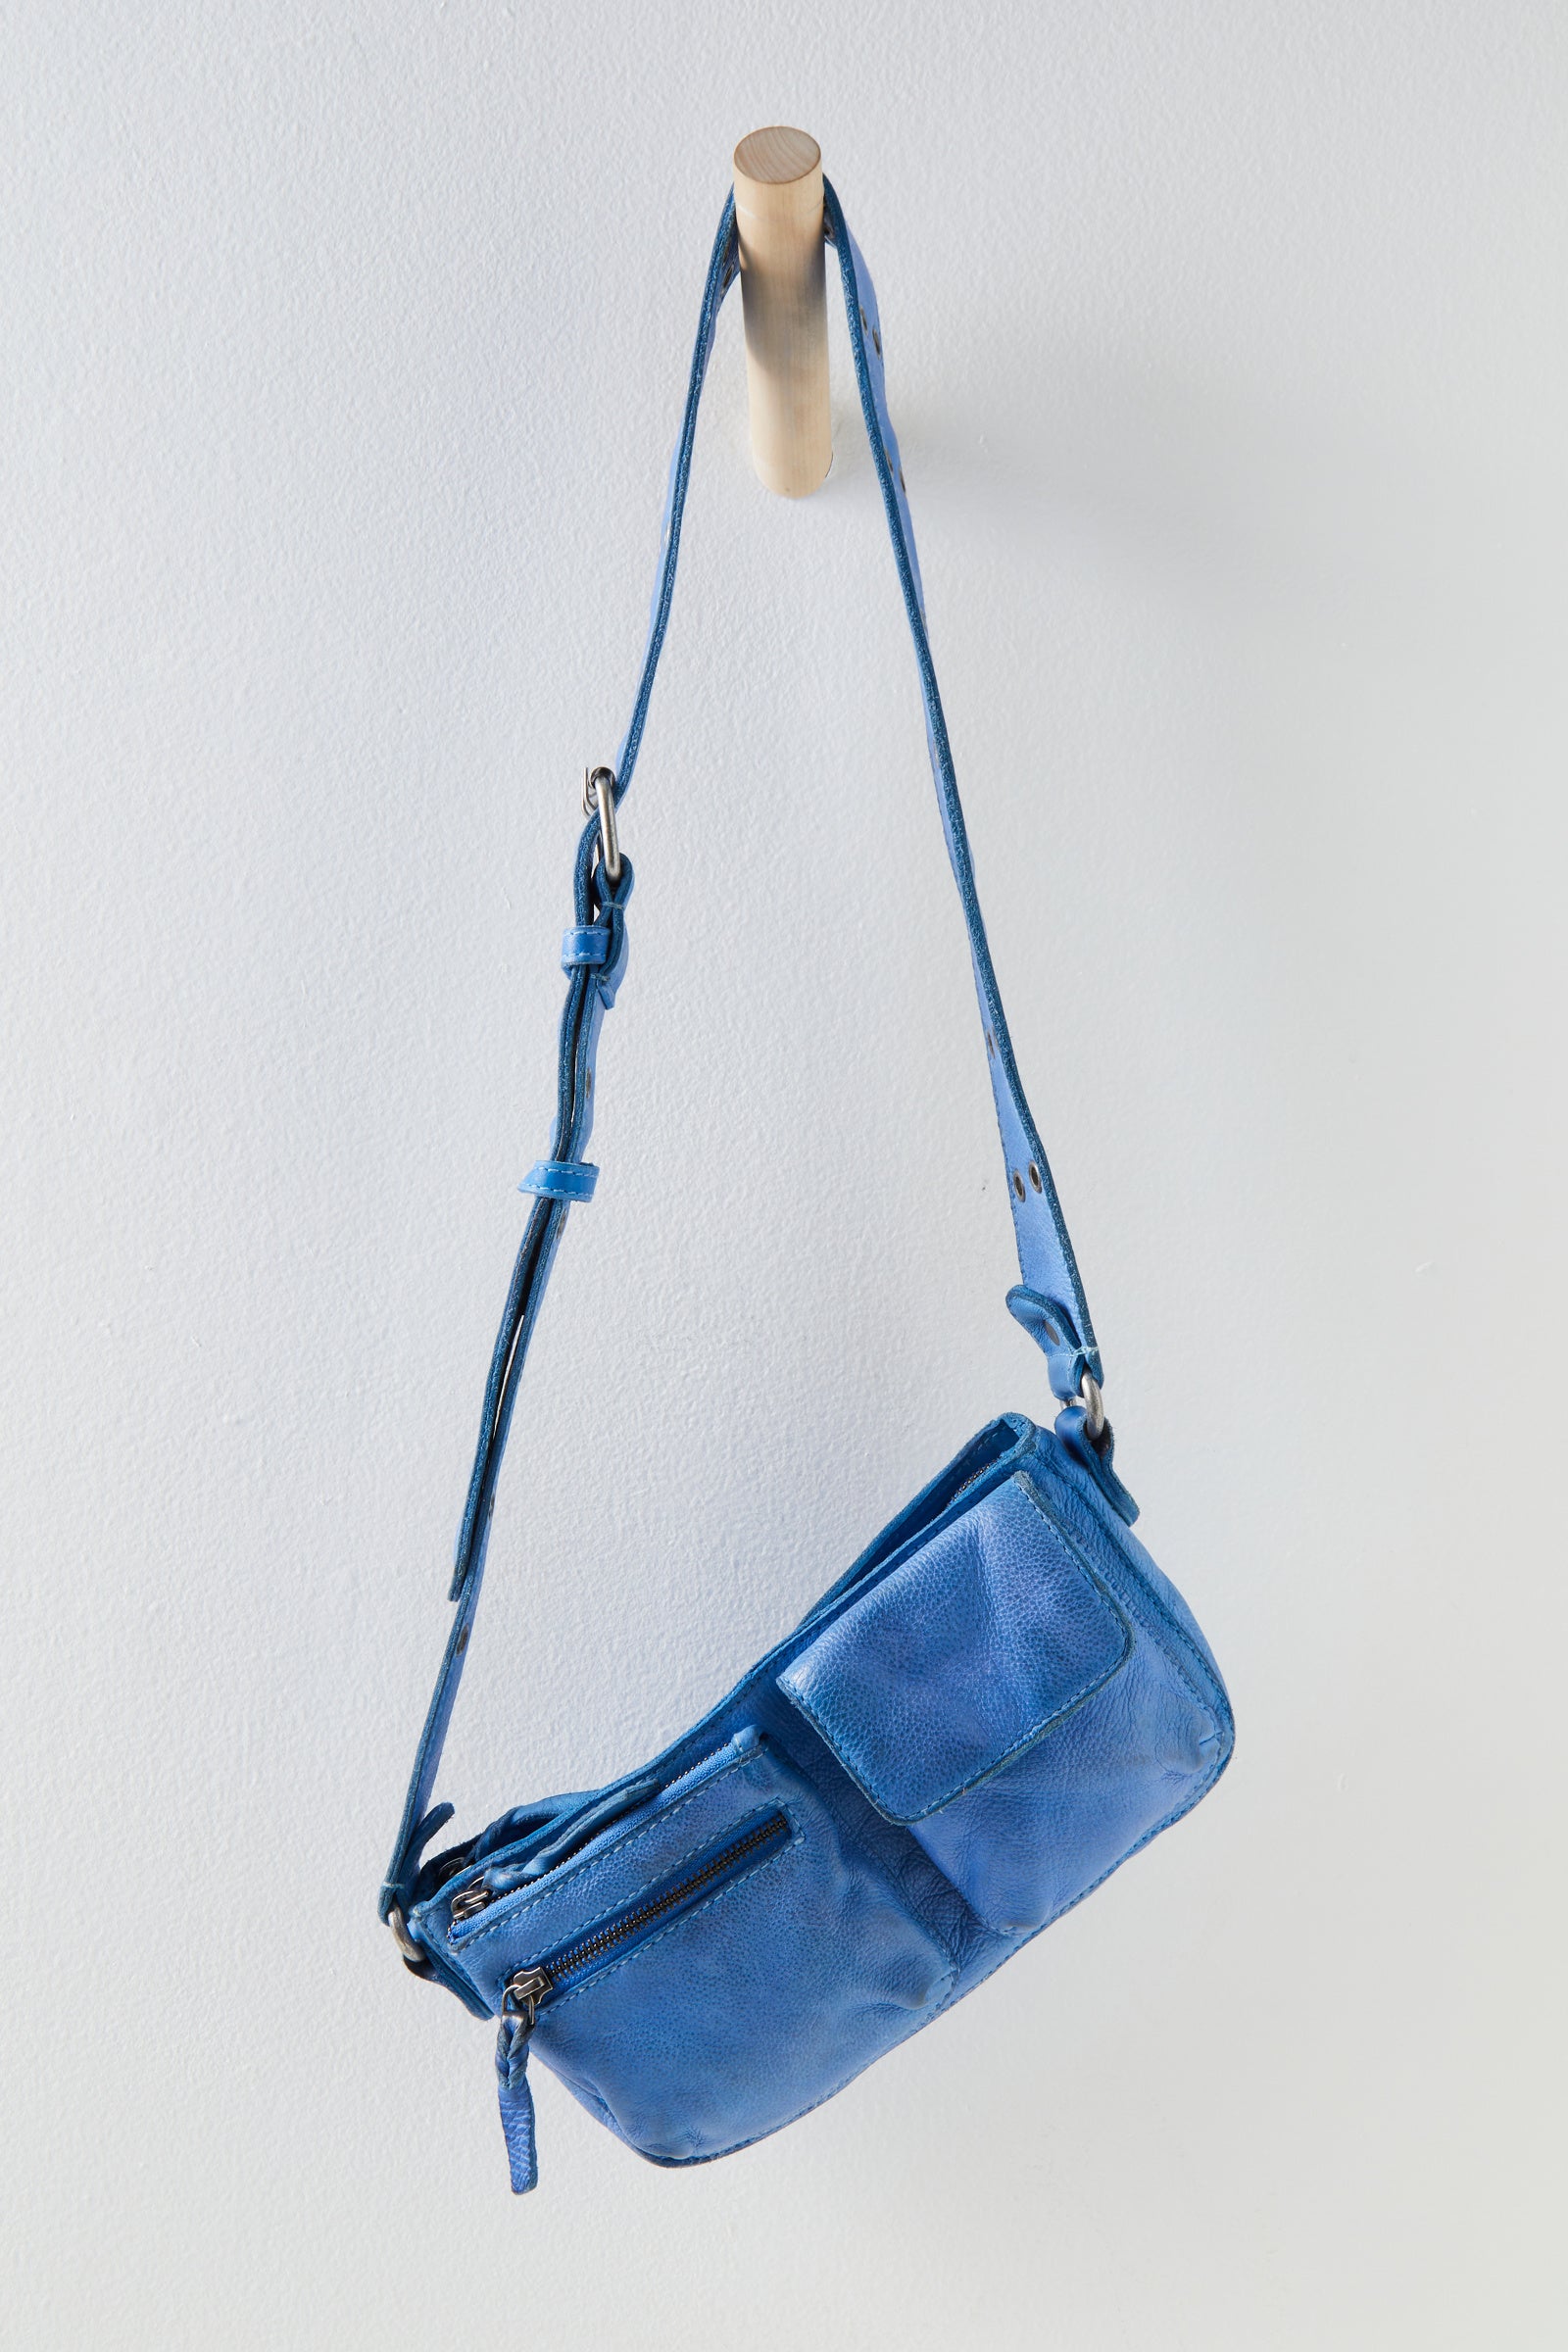 WADE LEATHER SLING-IRIDESCENT BLUE